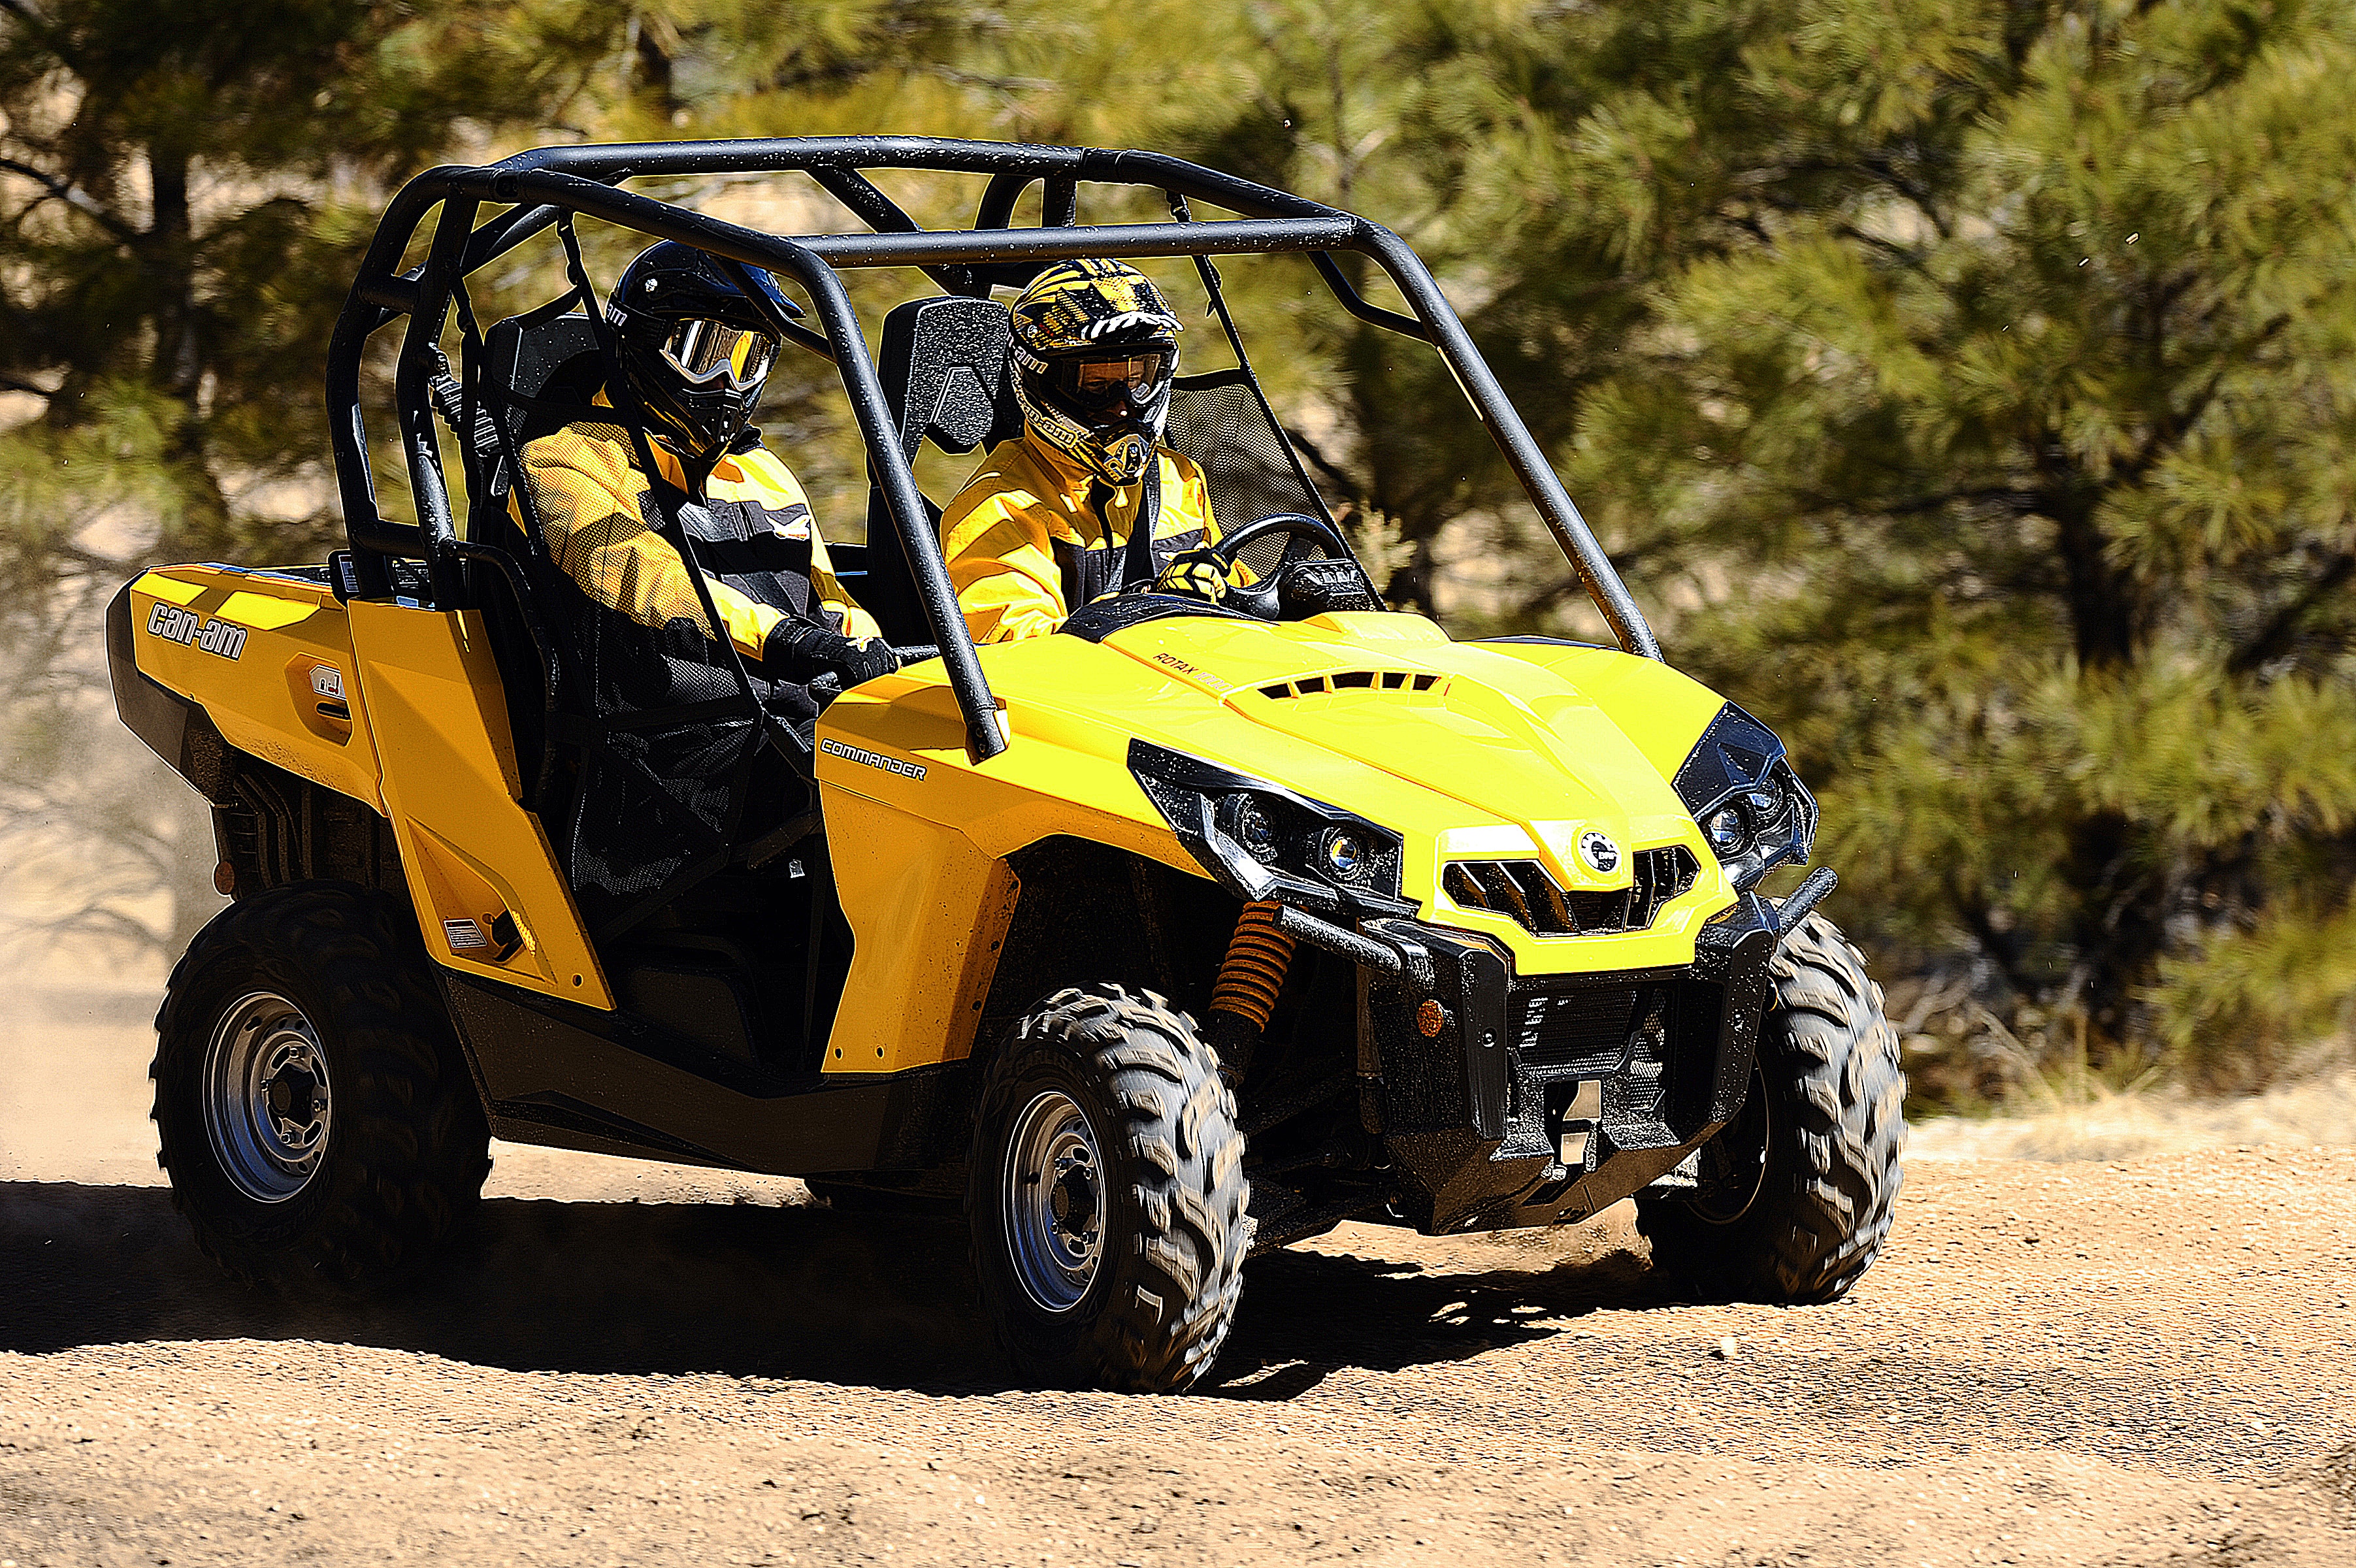 Vehículo side-by-side Can-Am Commander